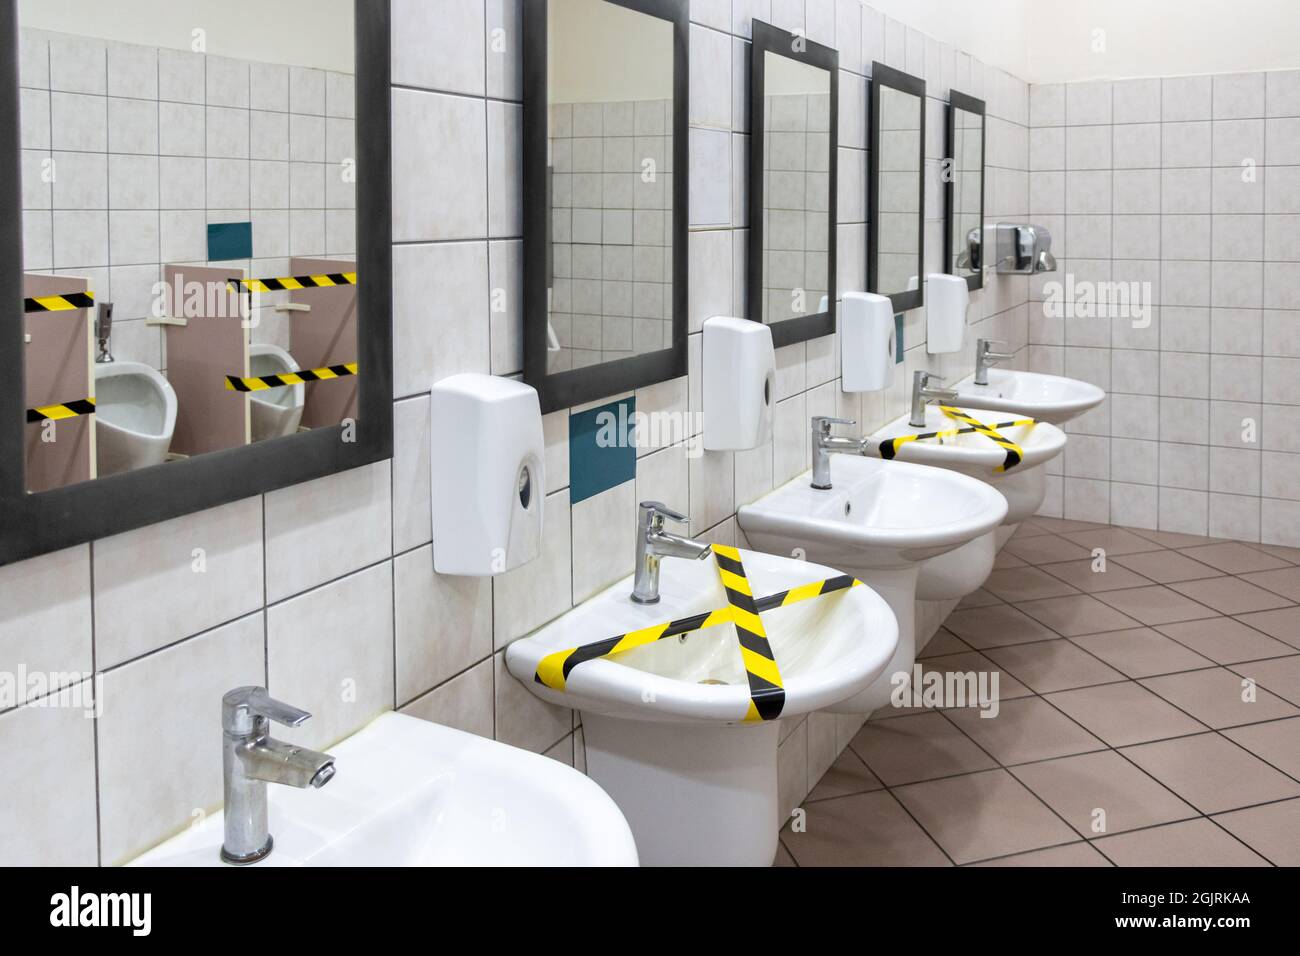 Social life measures applied in public toilets for covid-19 measures. Social Distance Stock Photo